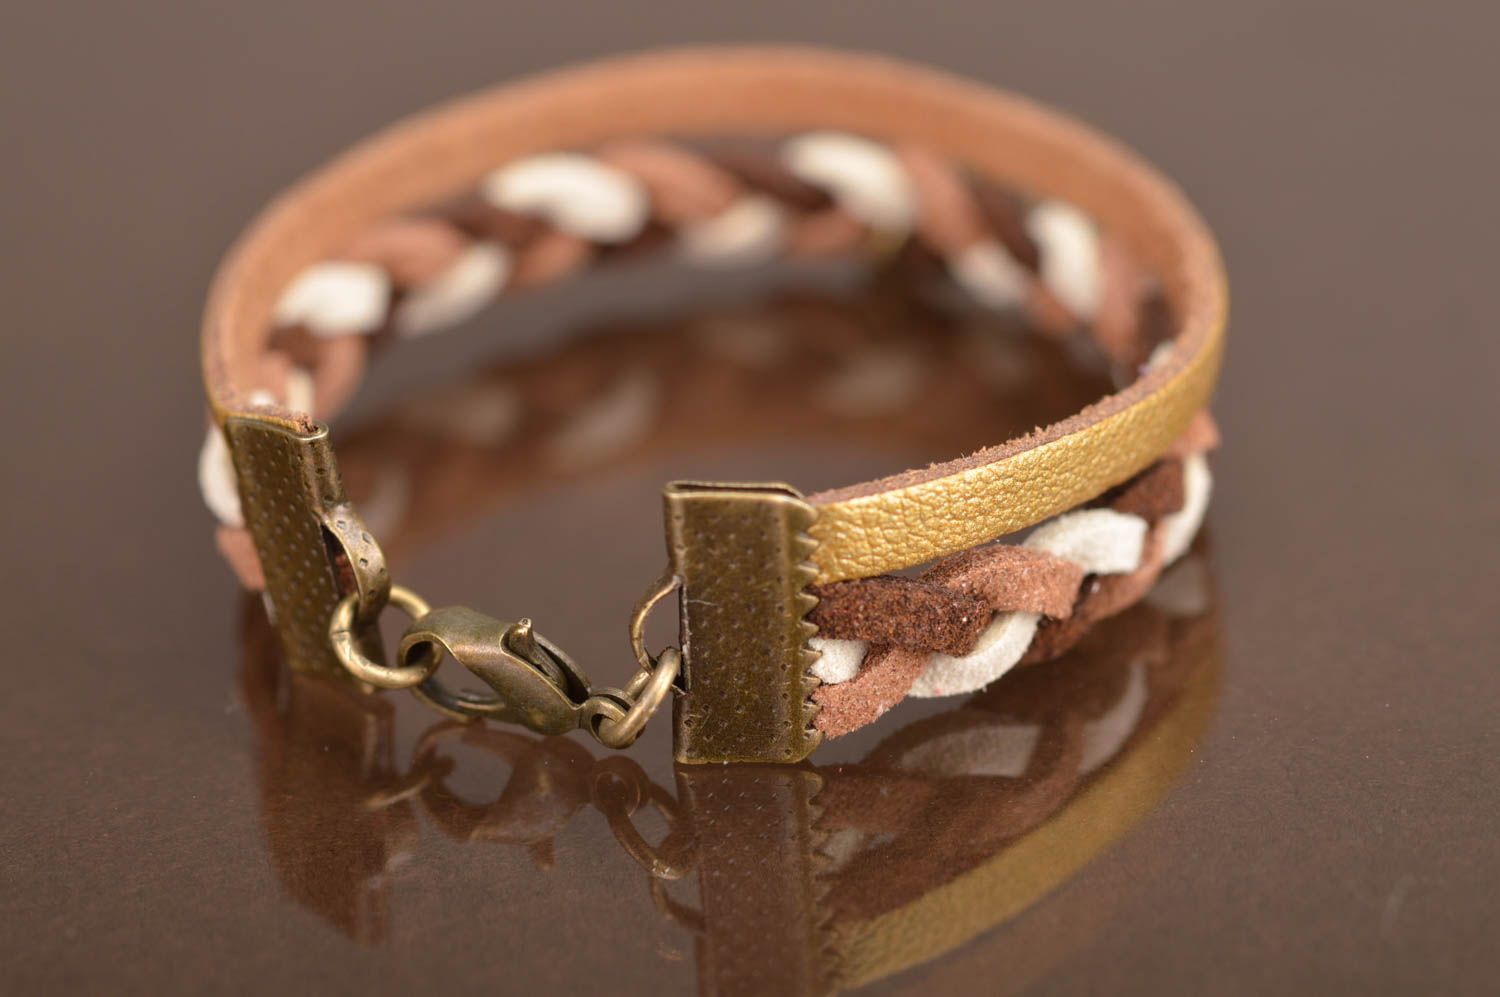 Handmade leather wrist bracelet with suede cord and metal charm Bicycle photo 4